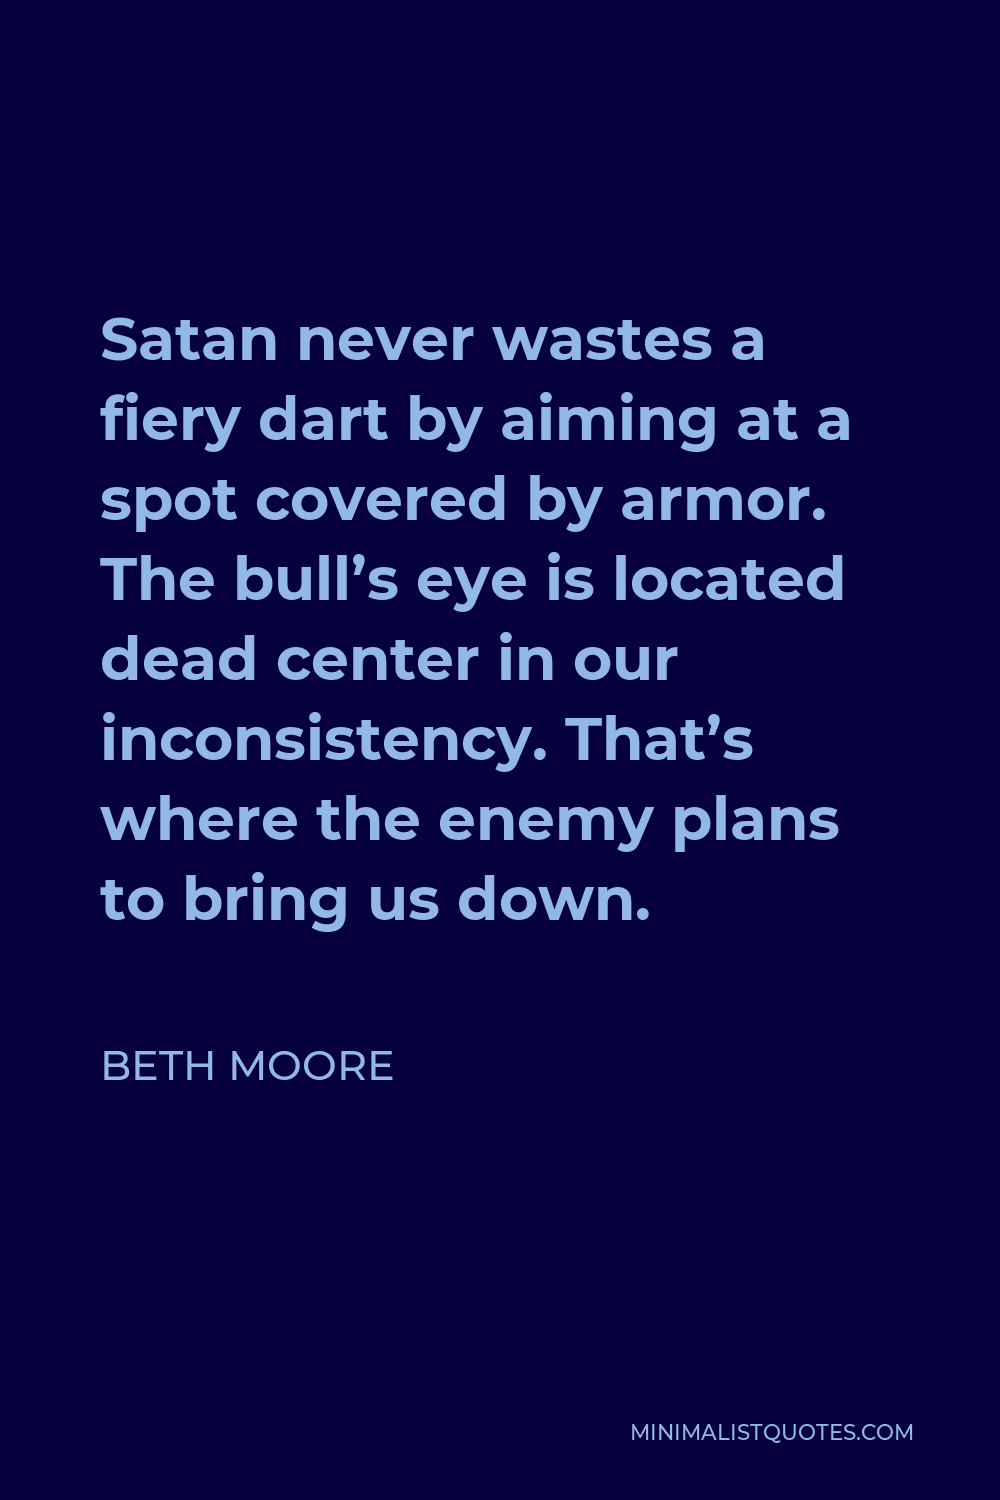 Beth Moore Quote - Satan never wastes a fiery dart by aiming at a spot covered by armor. The bull’s eye is located dead center in our inconsistency. That’s where the enemy plans to bring us down.